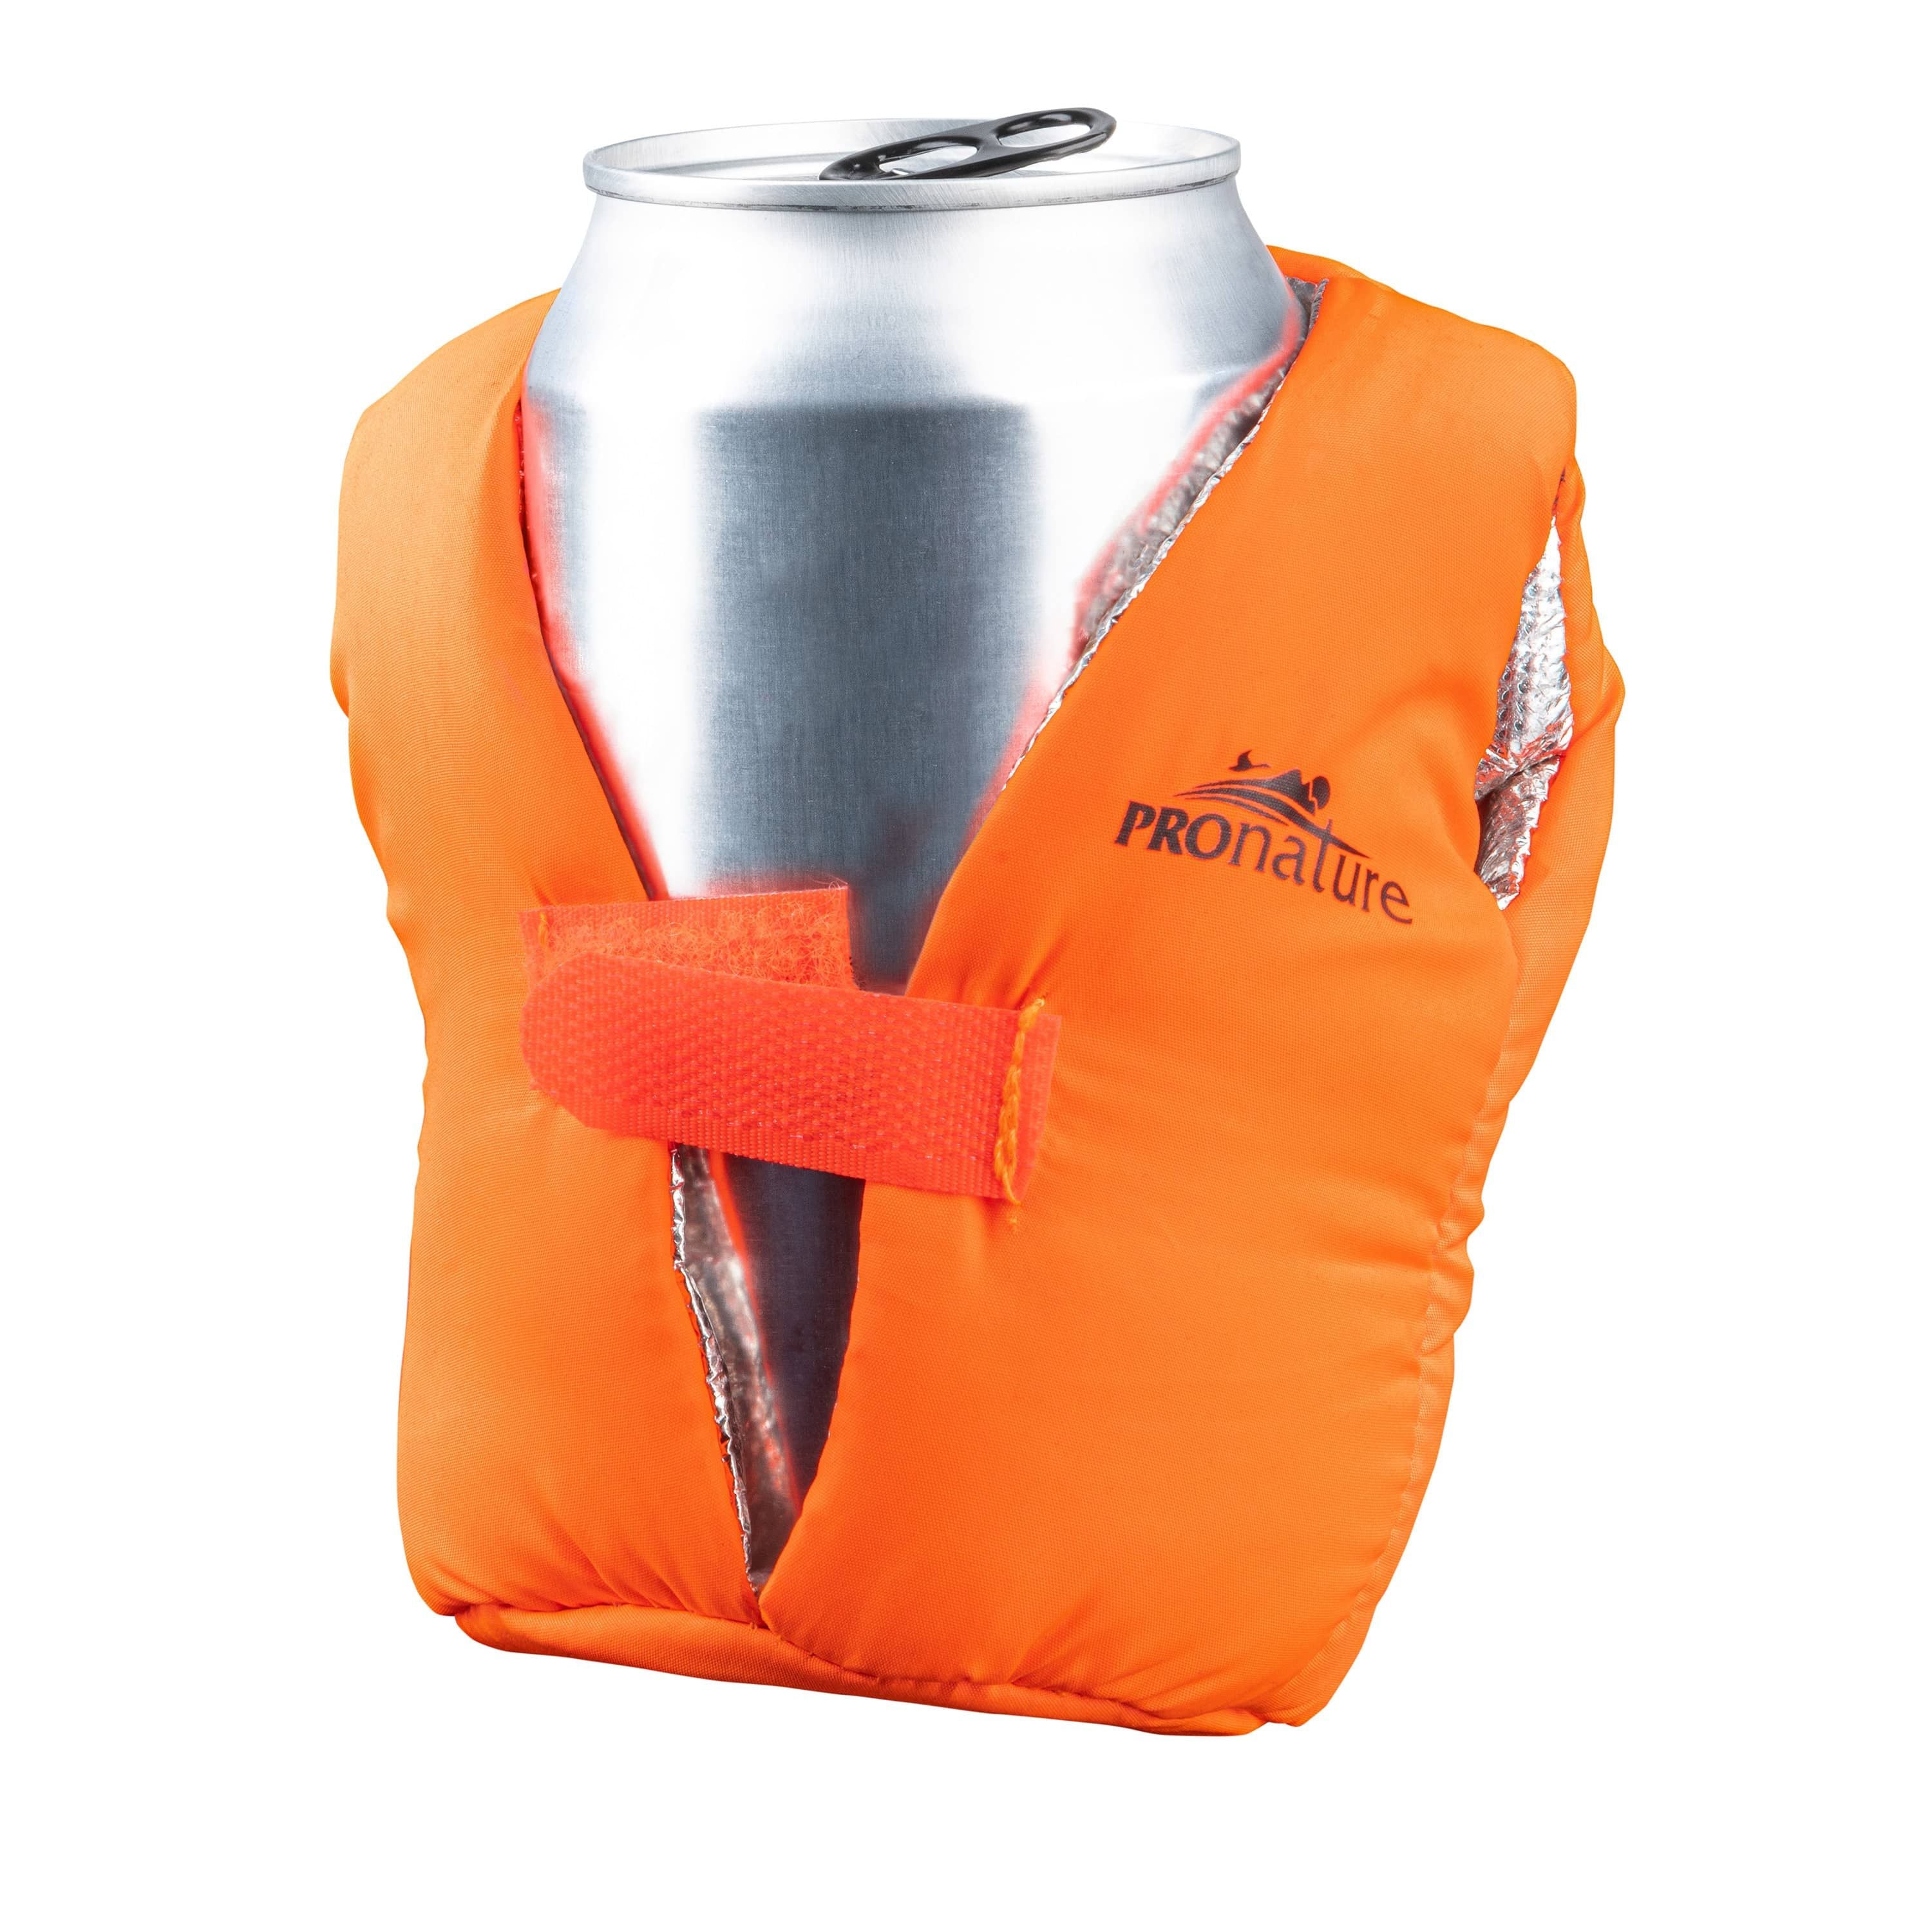 Insulated can holder